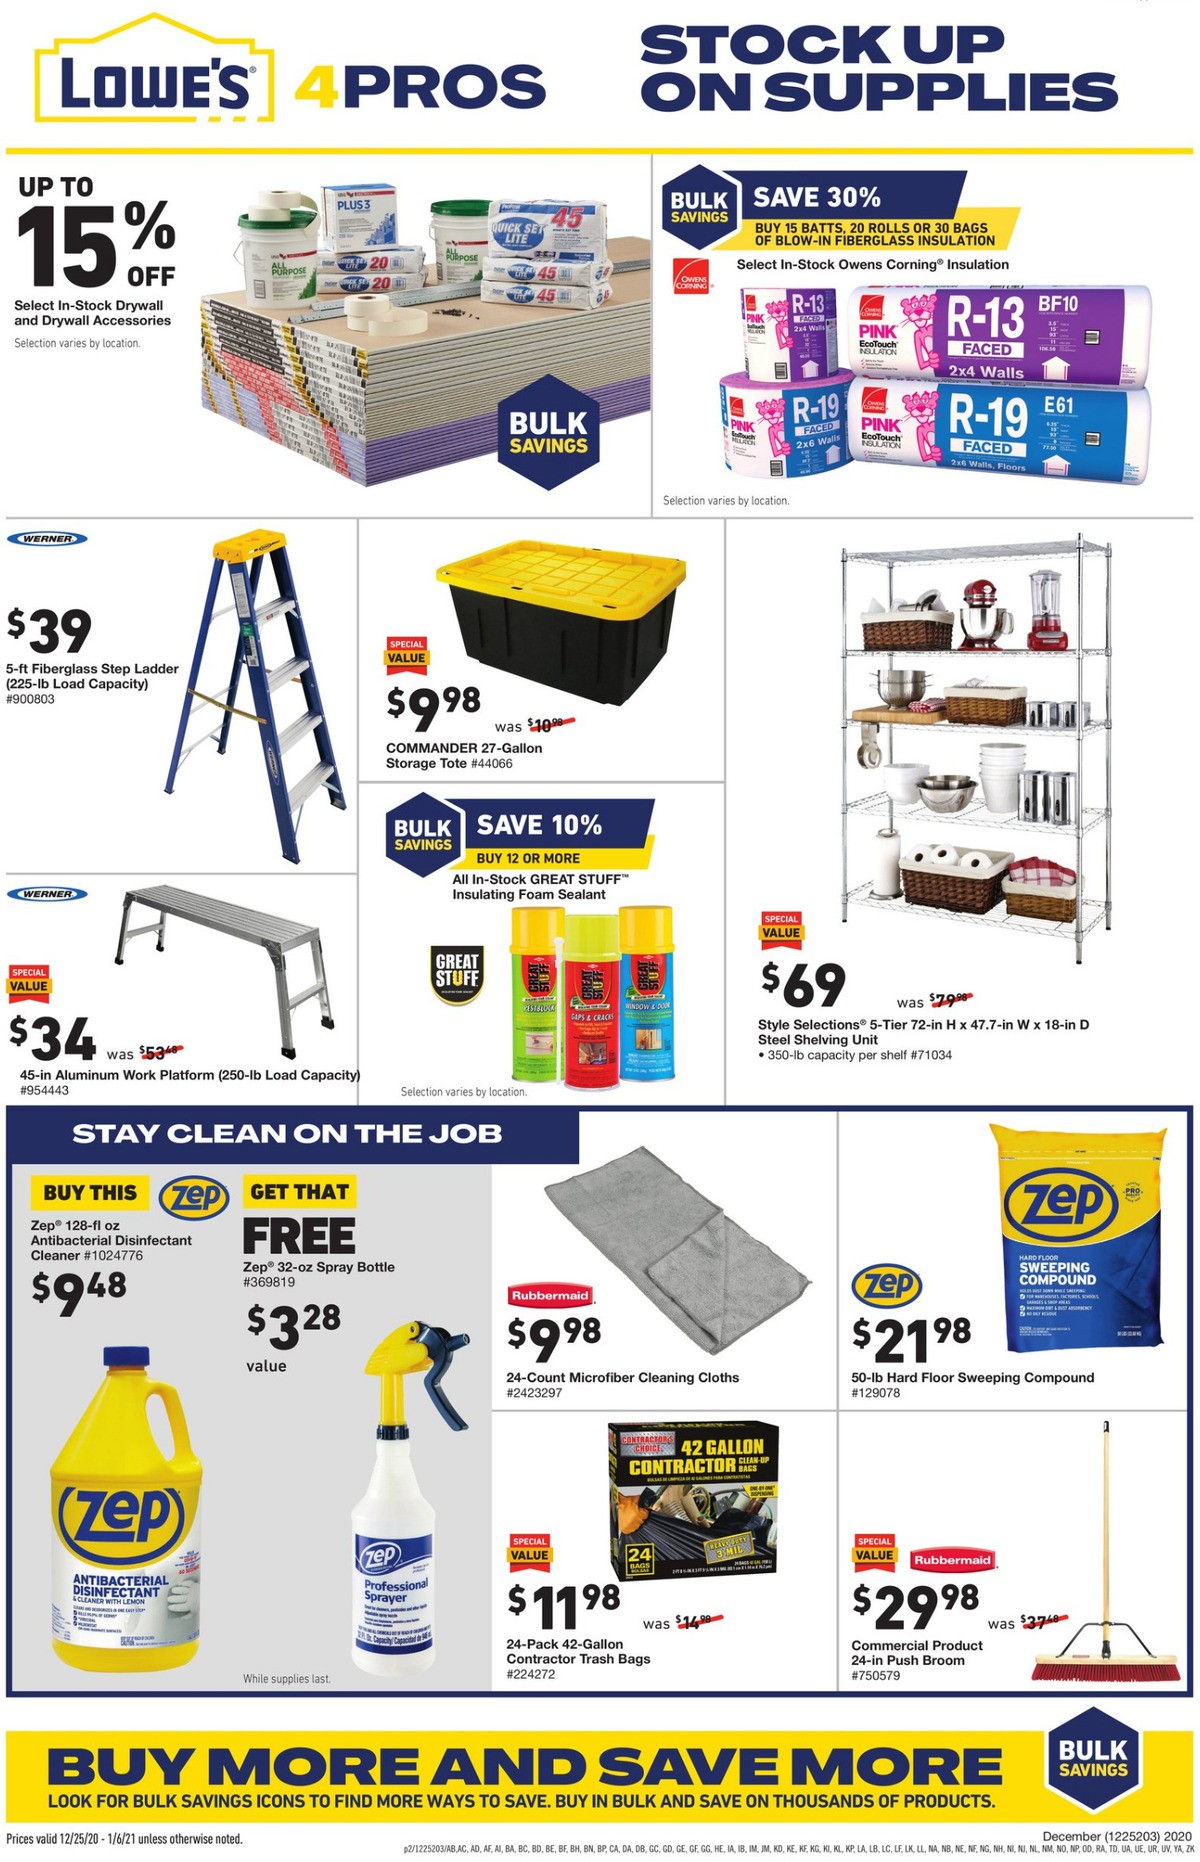 Lowe's Pro Ad Weekly Ad from December 25